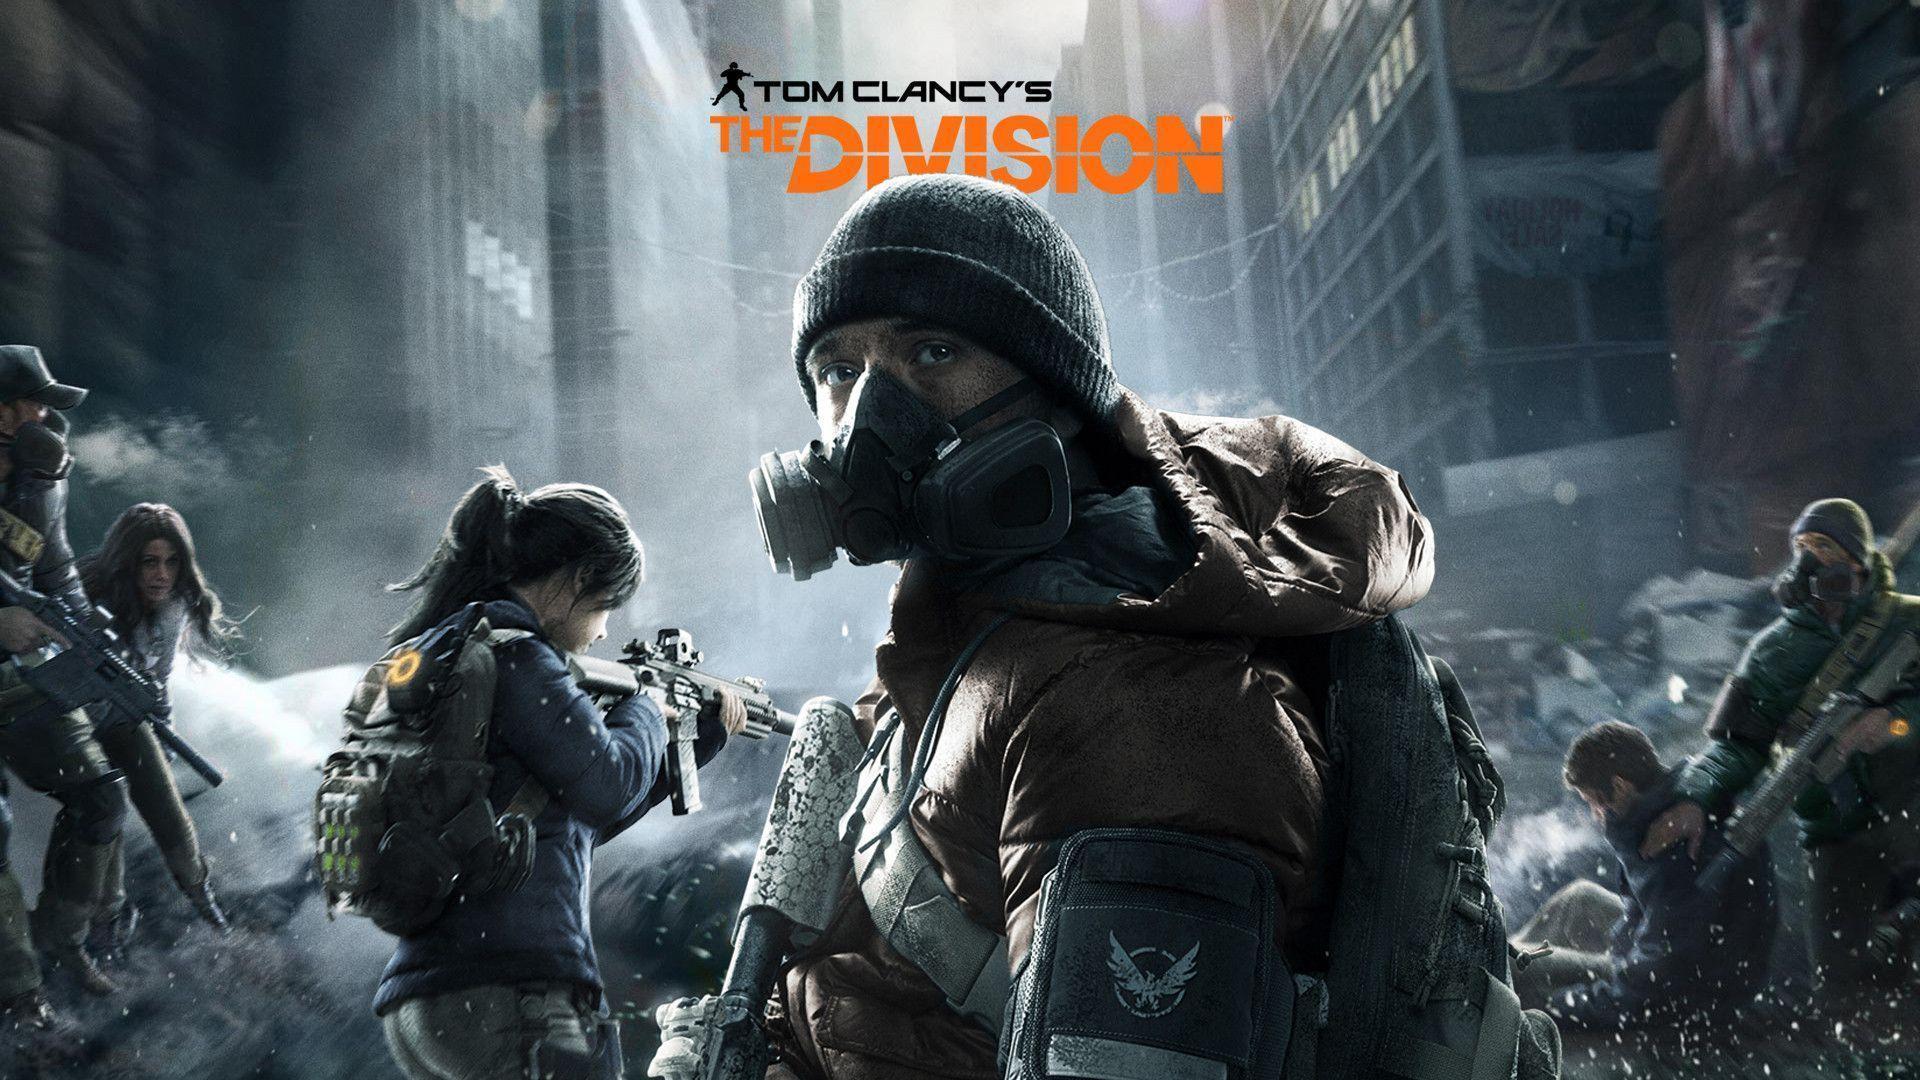 Wallpaper  Tom Clancys The Division Tom Clancys The Division 2 video  games 1920x1080  rzkf  1486767  HD Wallpapers  WallHere